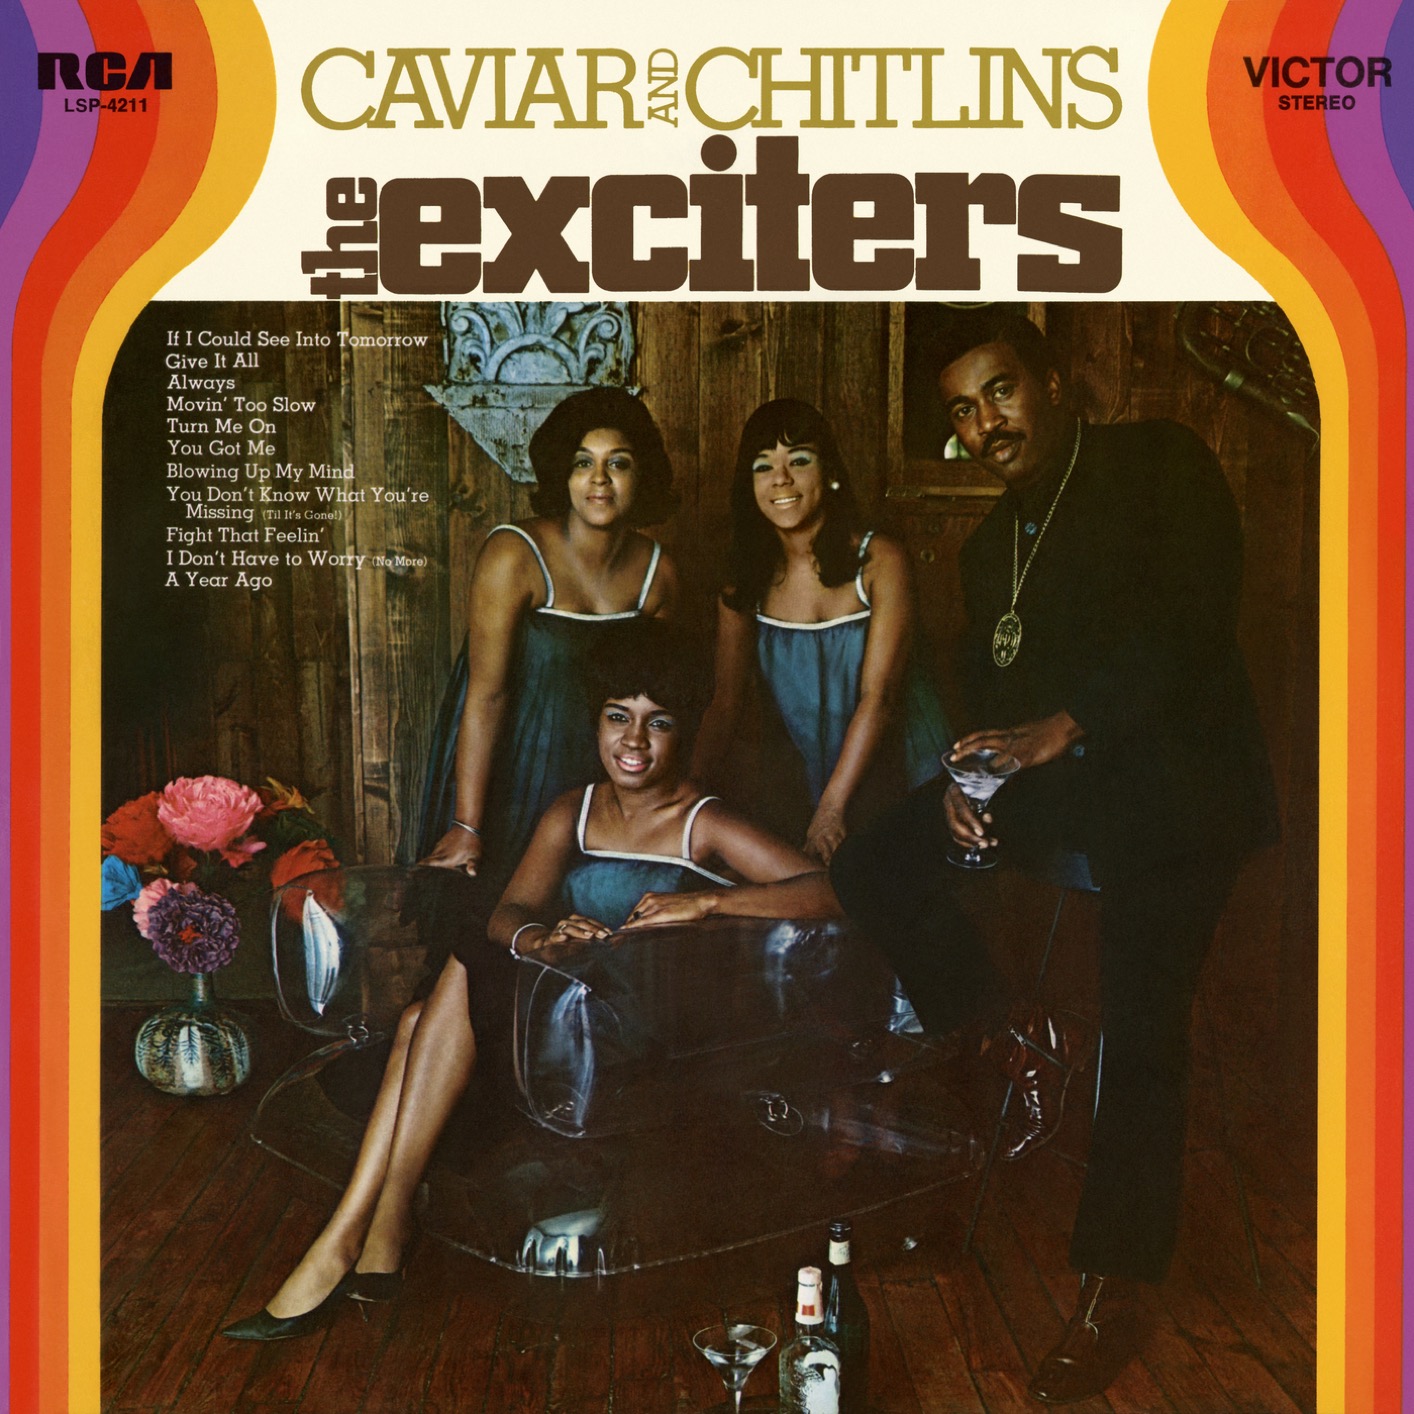 The Exciters – Caviar and Chitlins (Remastered) (1969/2019) [FLAC 24bit/192kHz]